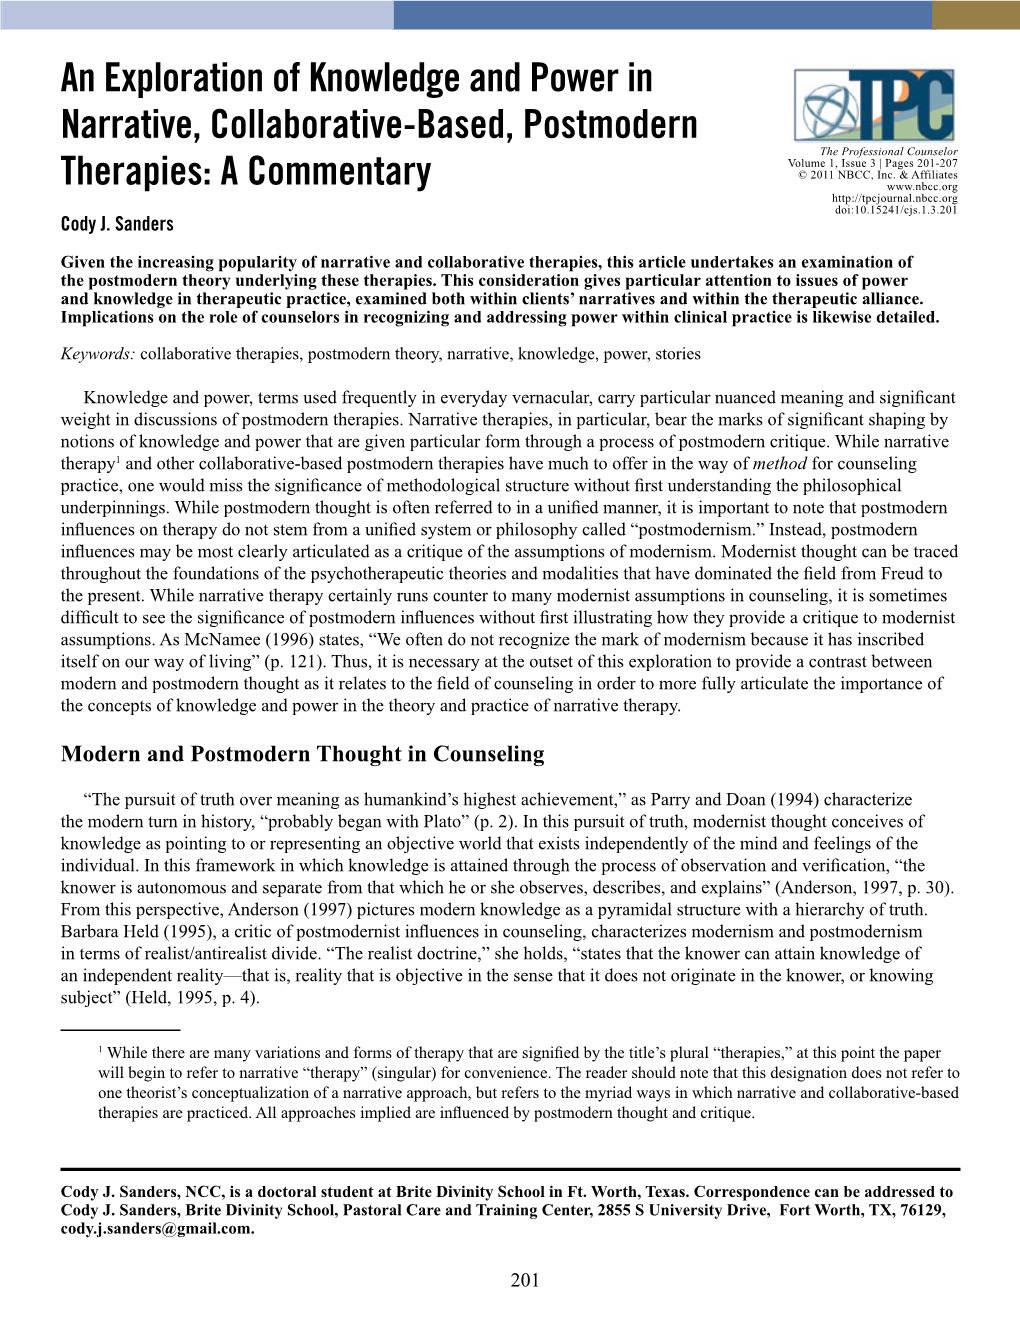 An Exploration of Knowledge and Power in Narrative, Collaborative-Based, Postmodern Therapies